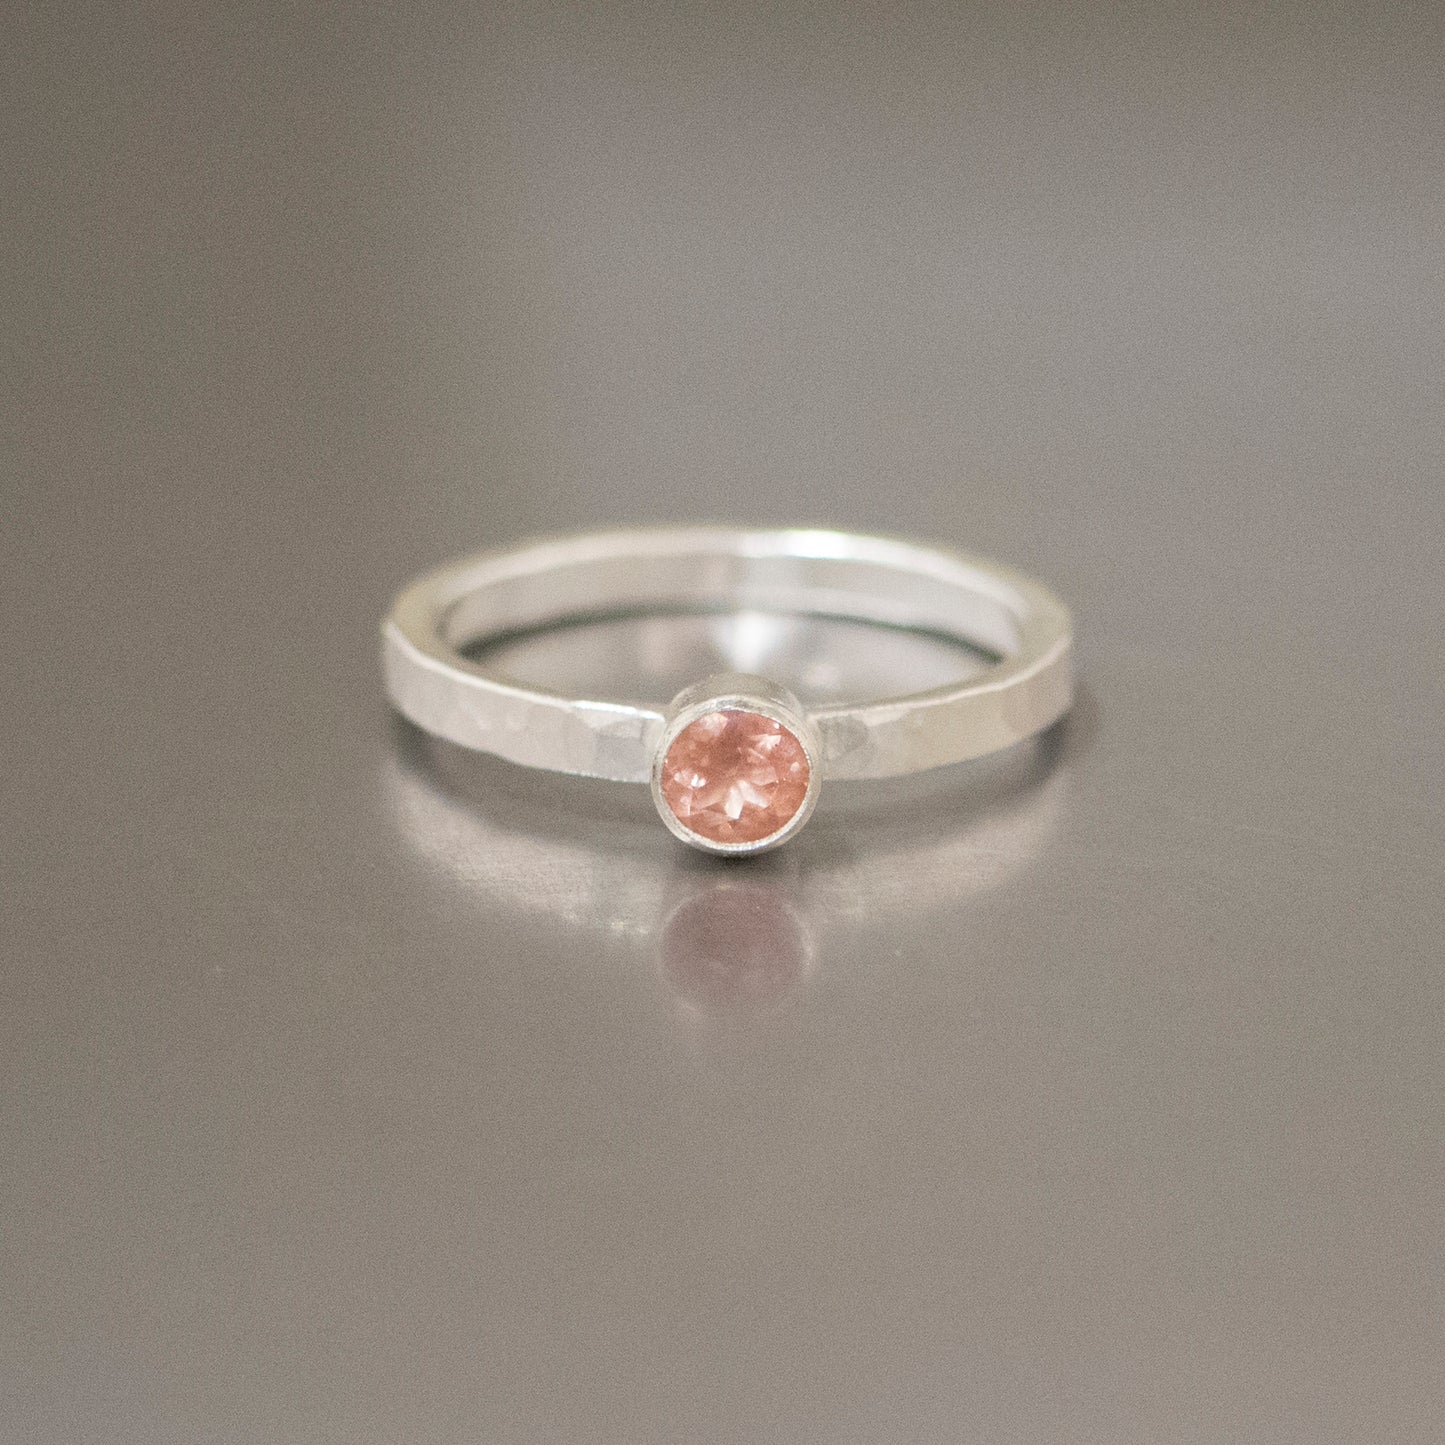 Sunstone Stacking Ring-Stack on the Sunstone!